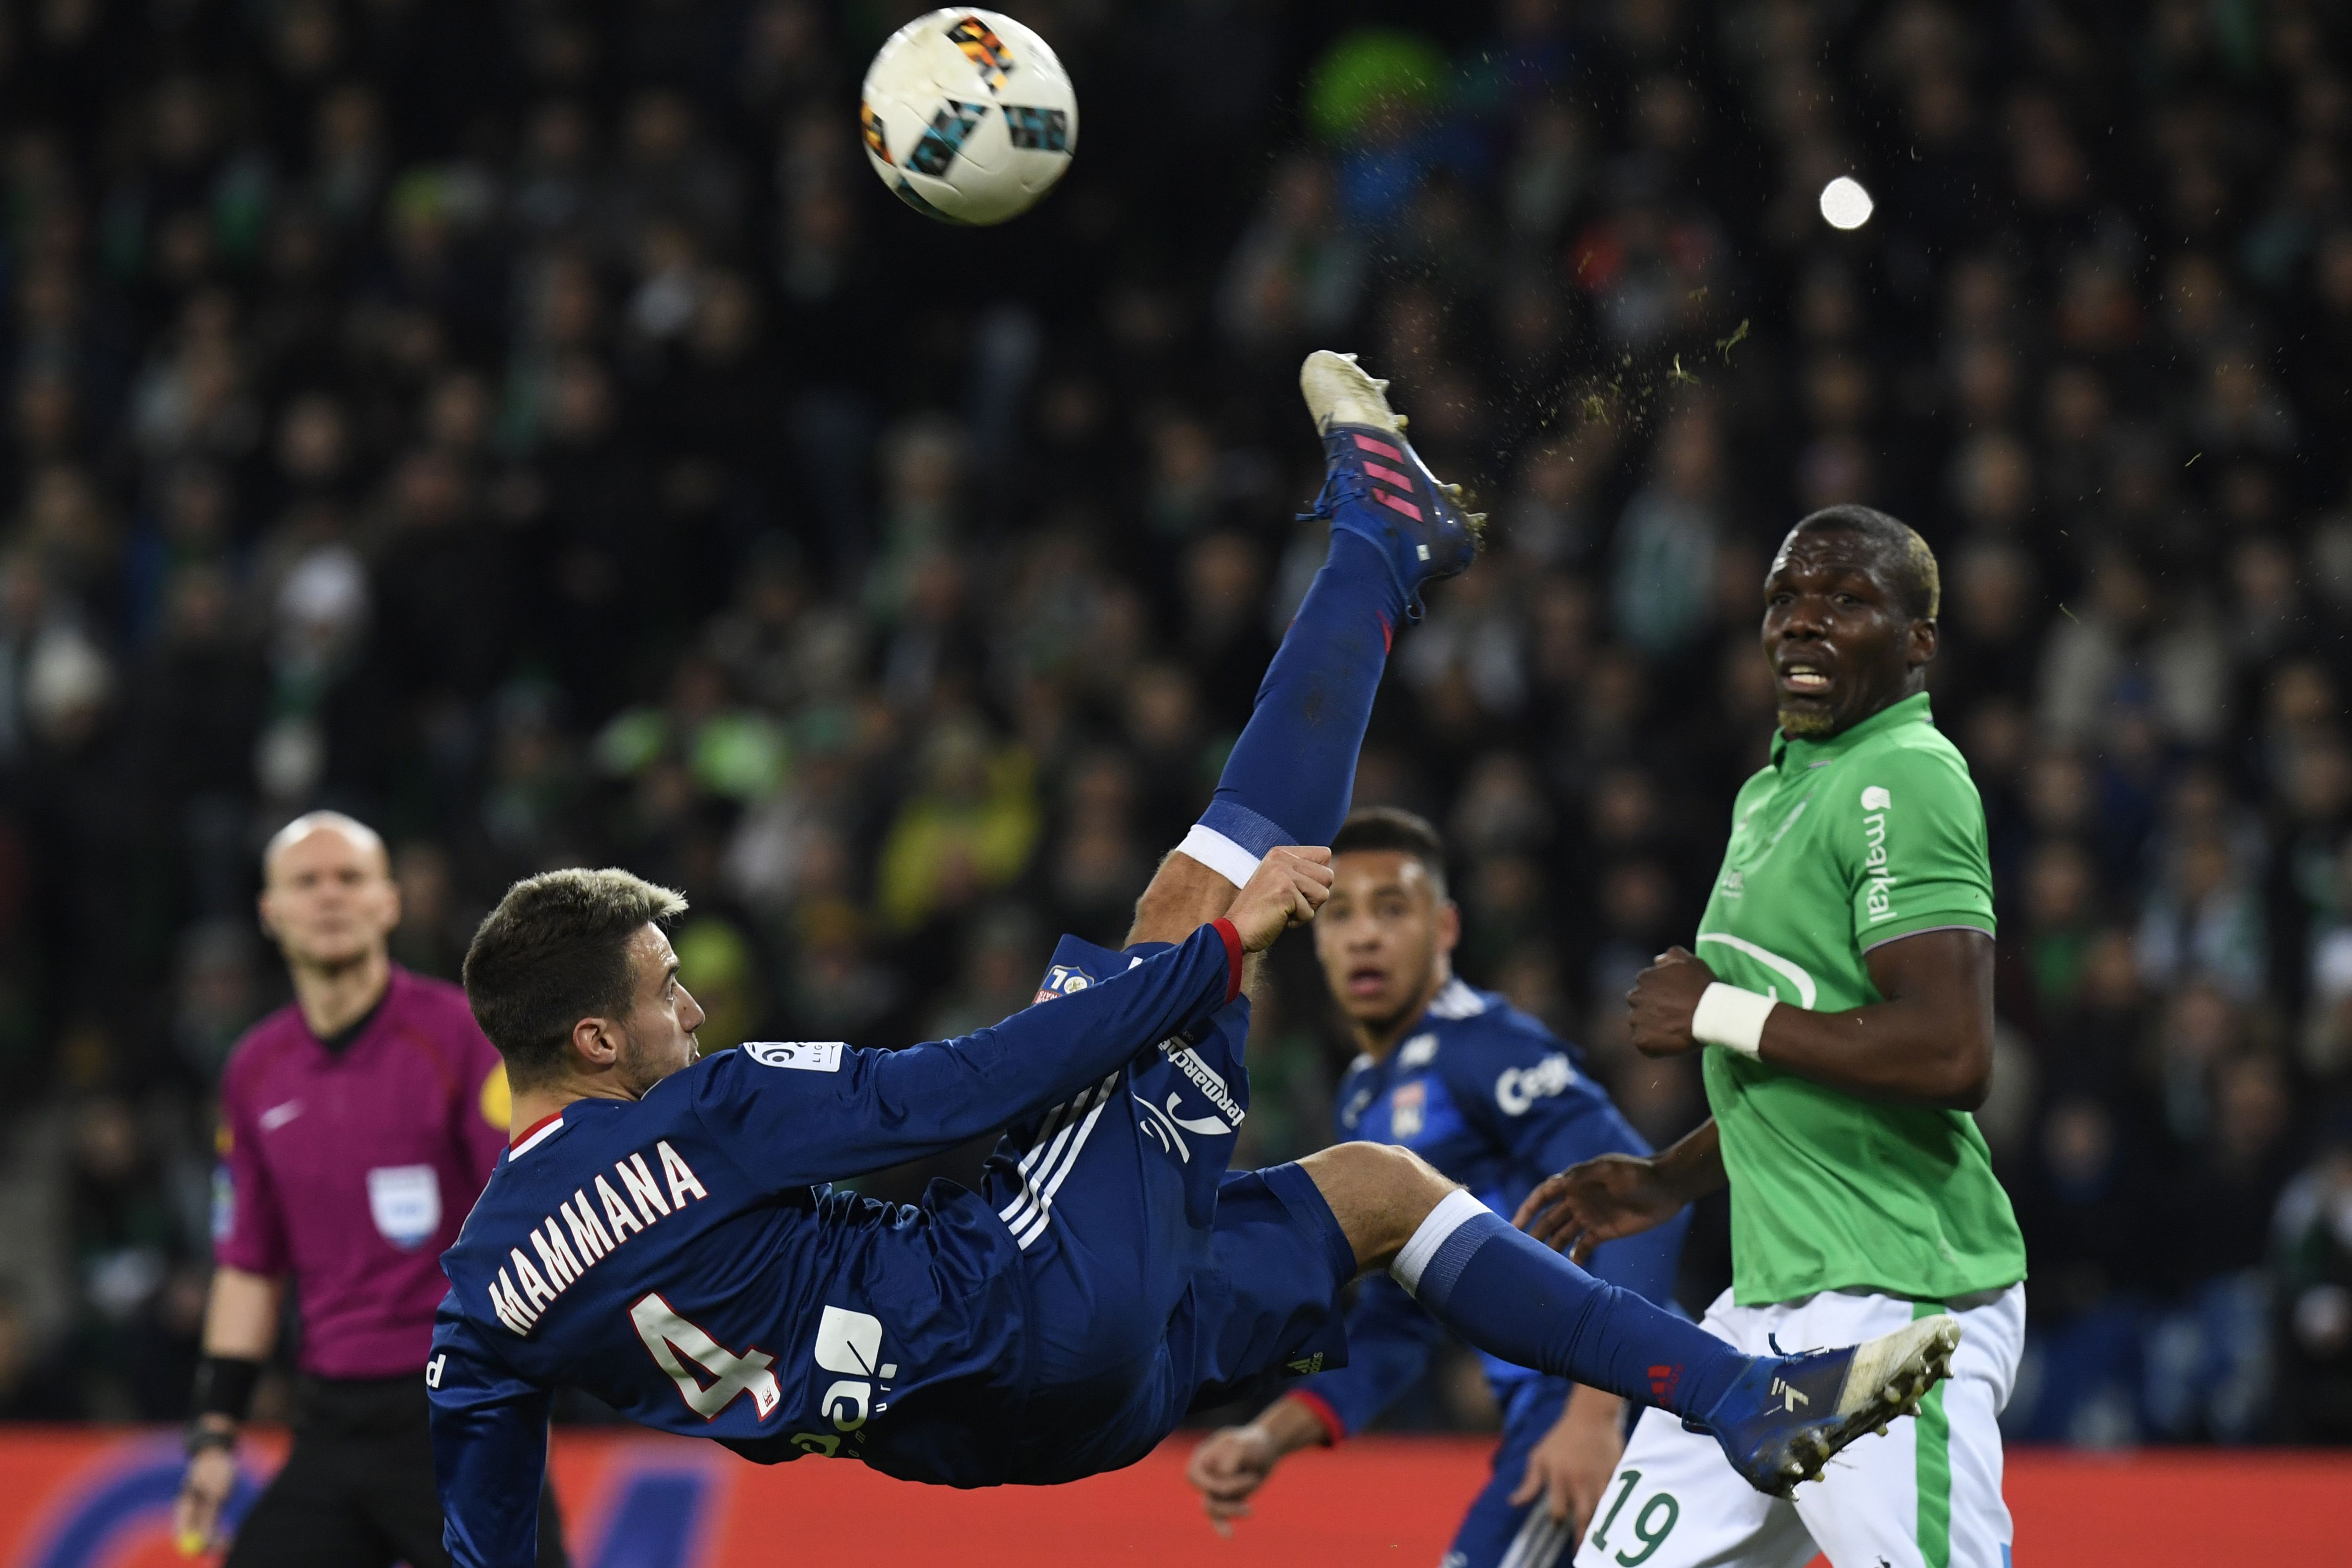 TOPSHOT - Lyon's Argentinian defender Emanuel Mammana kicks the ball as Saint-Etienne's Guinean defender Florentin Pogba (R) looks on during the French L1 football match between AS Saint-Etienne and Olympique Lyonnais on February 5, 2017, at Geoffroy Guichard Stadium in Saint-Etienne. / AFP / PHILIPPE DESMAZES        (Photo credit should read PHILIPPE DESMAZES/AFP/Getty Images)